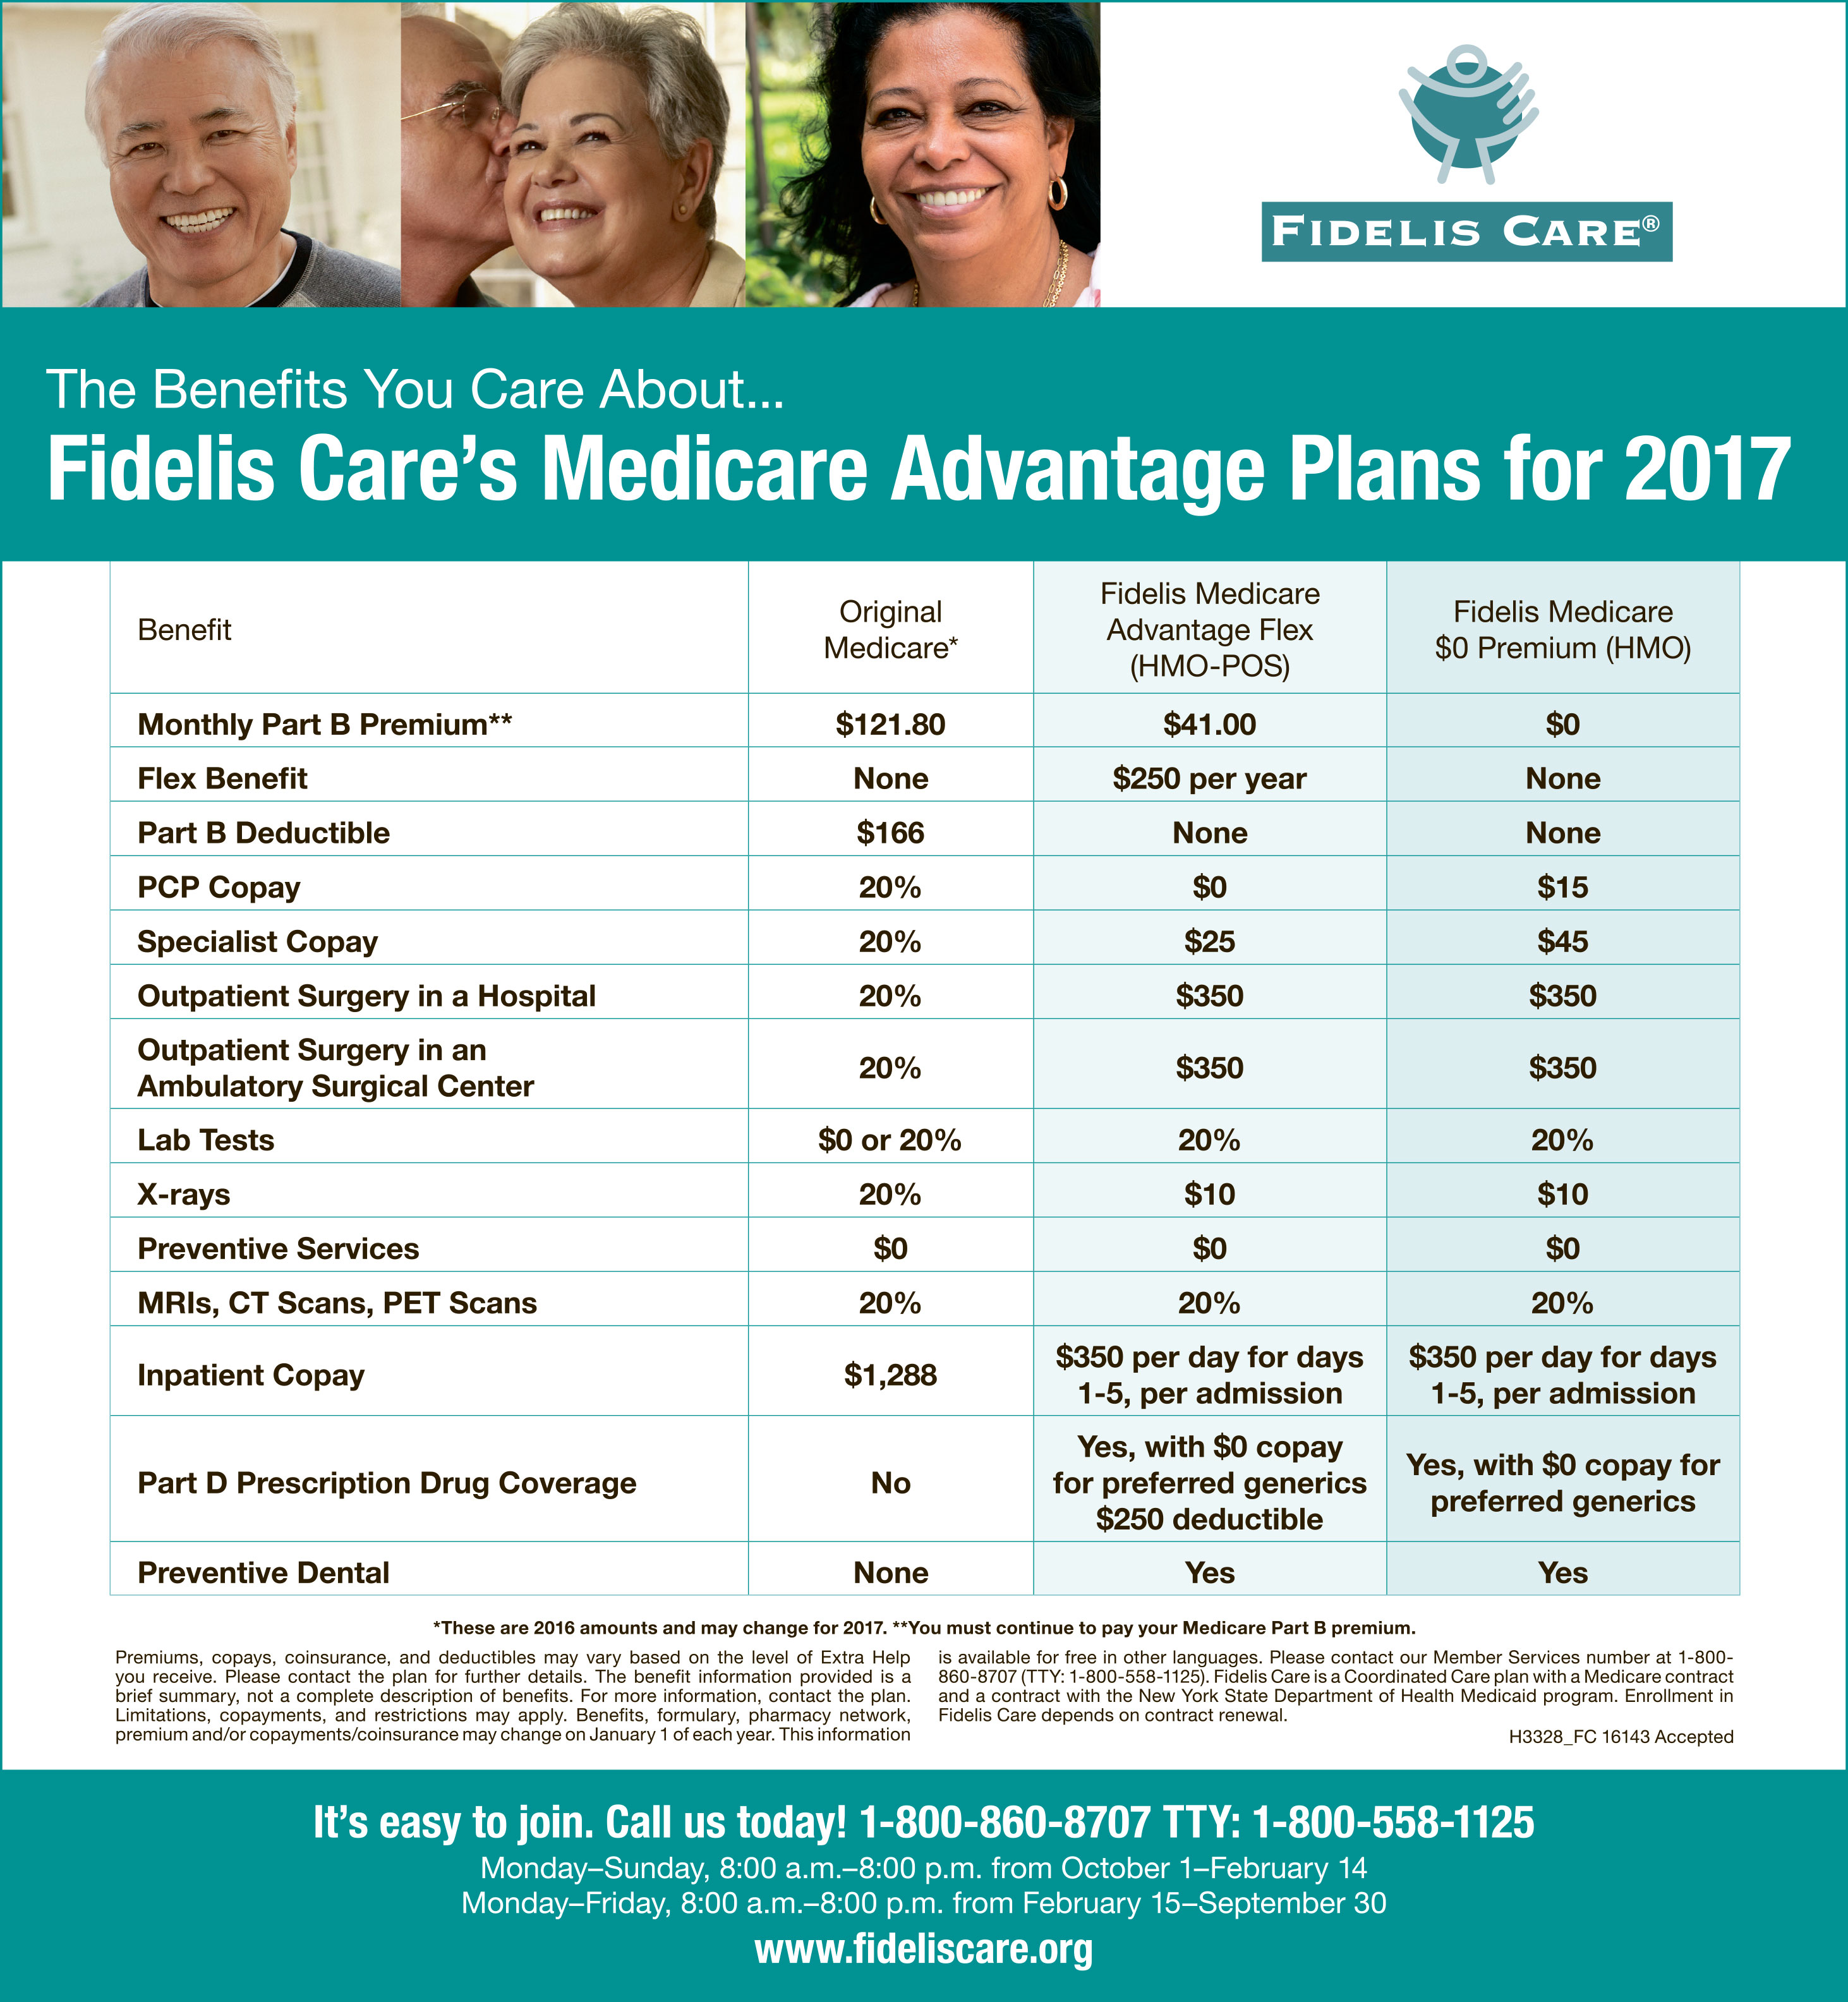 Fidelis Care: ABCs (and Ds) of Medicare Plans, Navigate Options with Fidelis  Care Before Open Enrollment Ends Dec. 7 - The Tablet